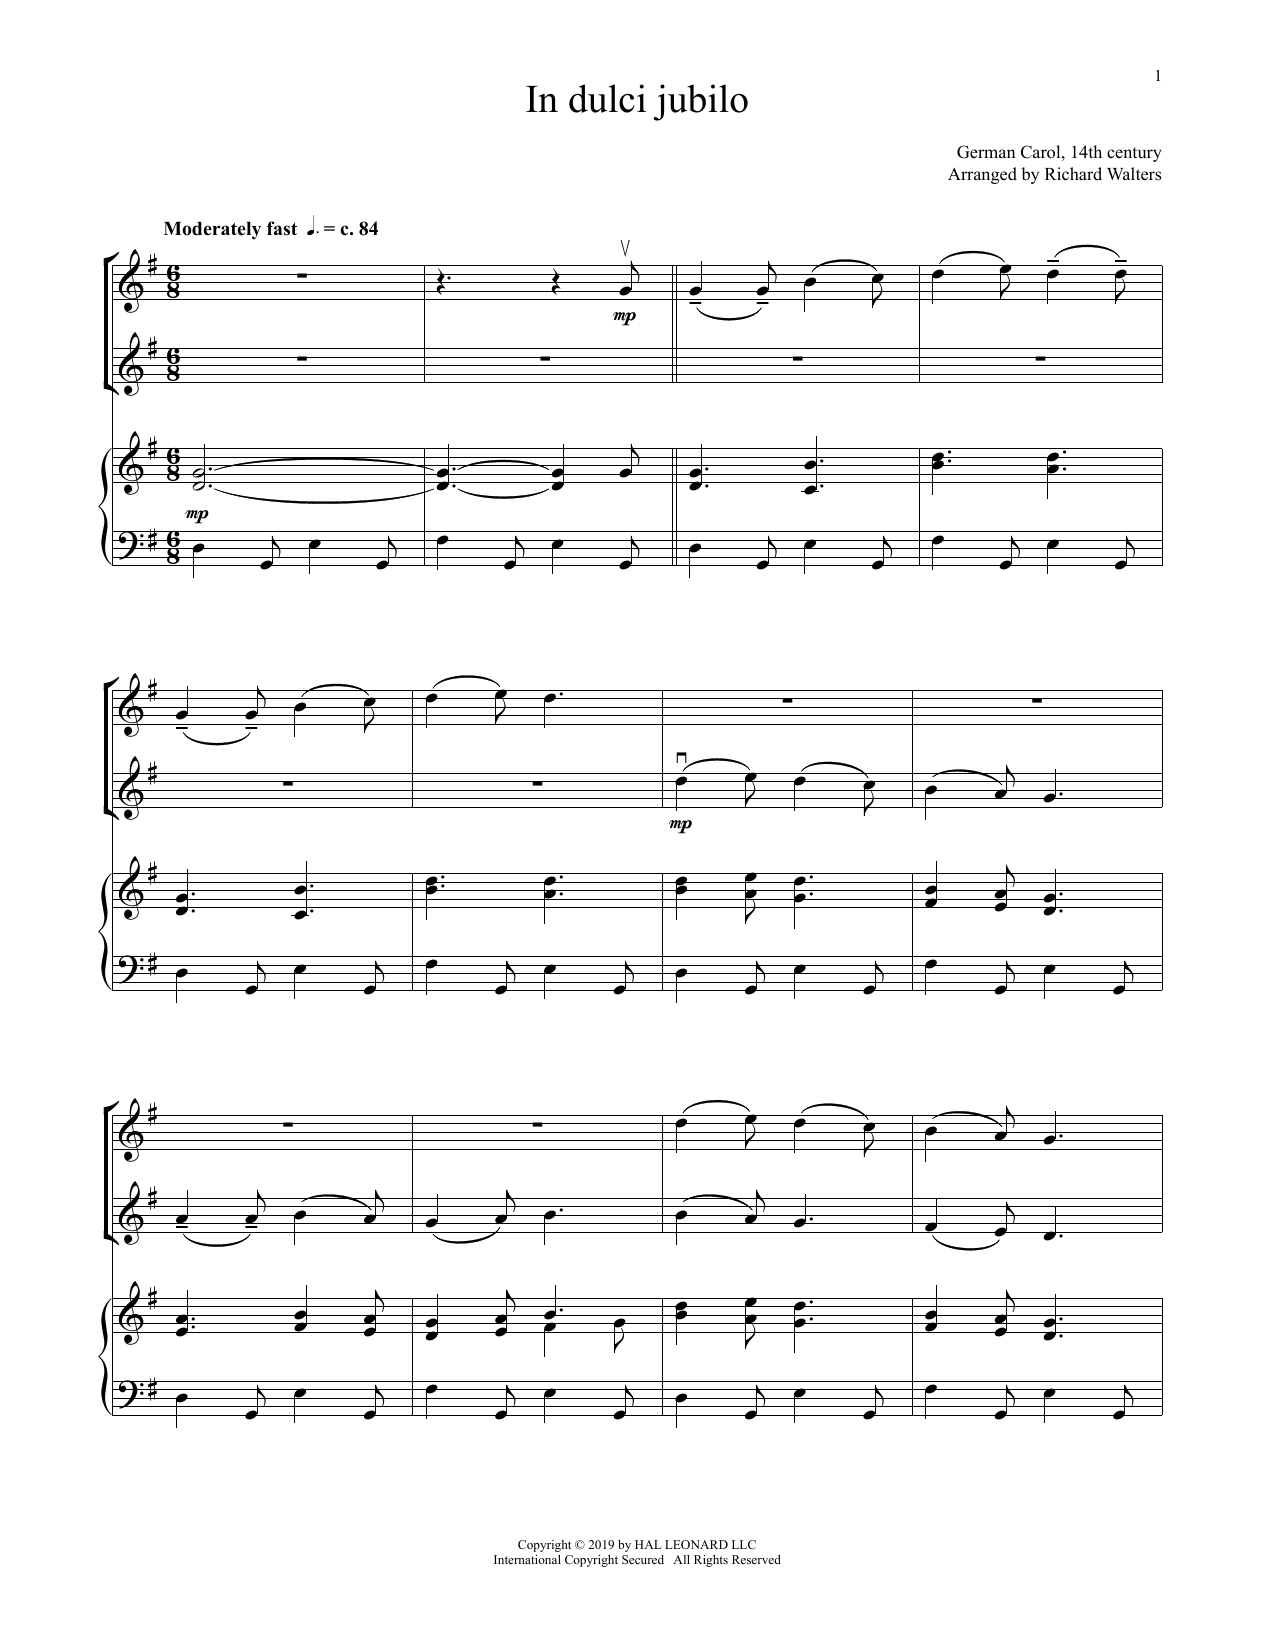 14th Century German Melody In Dulci Jubilo (for Violin Duet and Piano) sheet music notes and chords. Download Printable PDF.